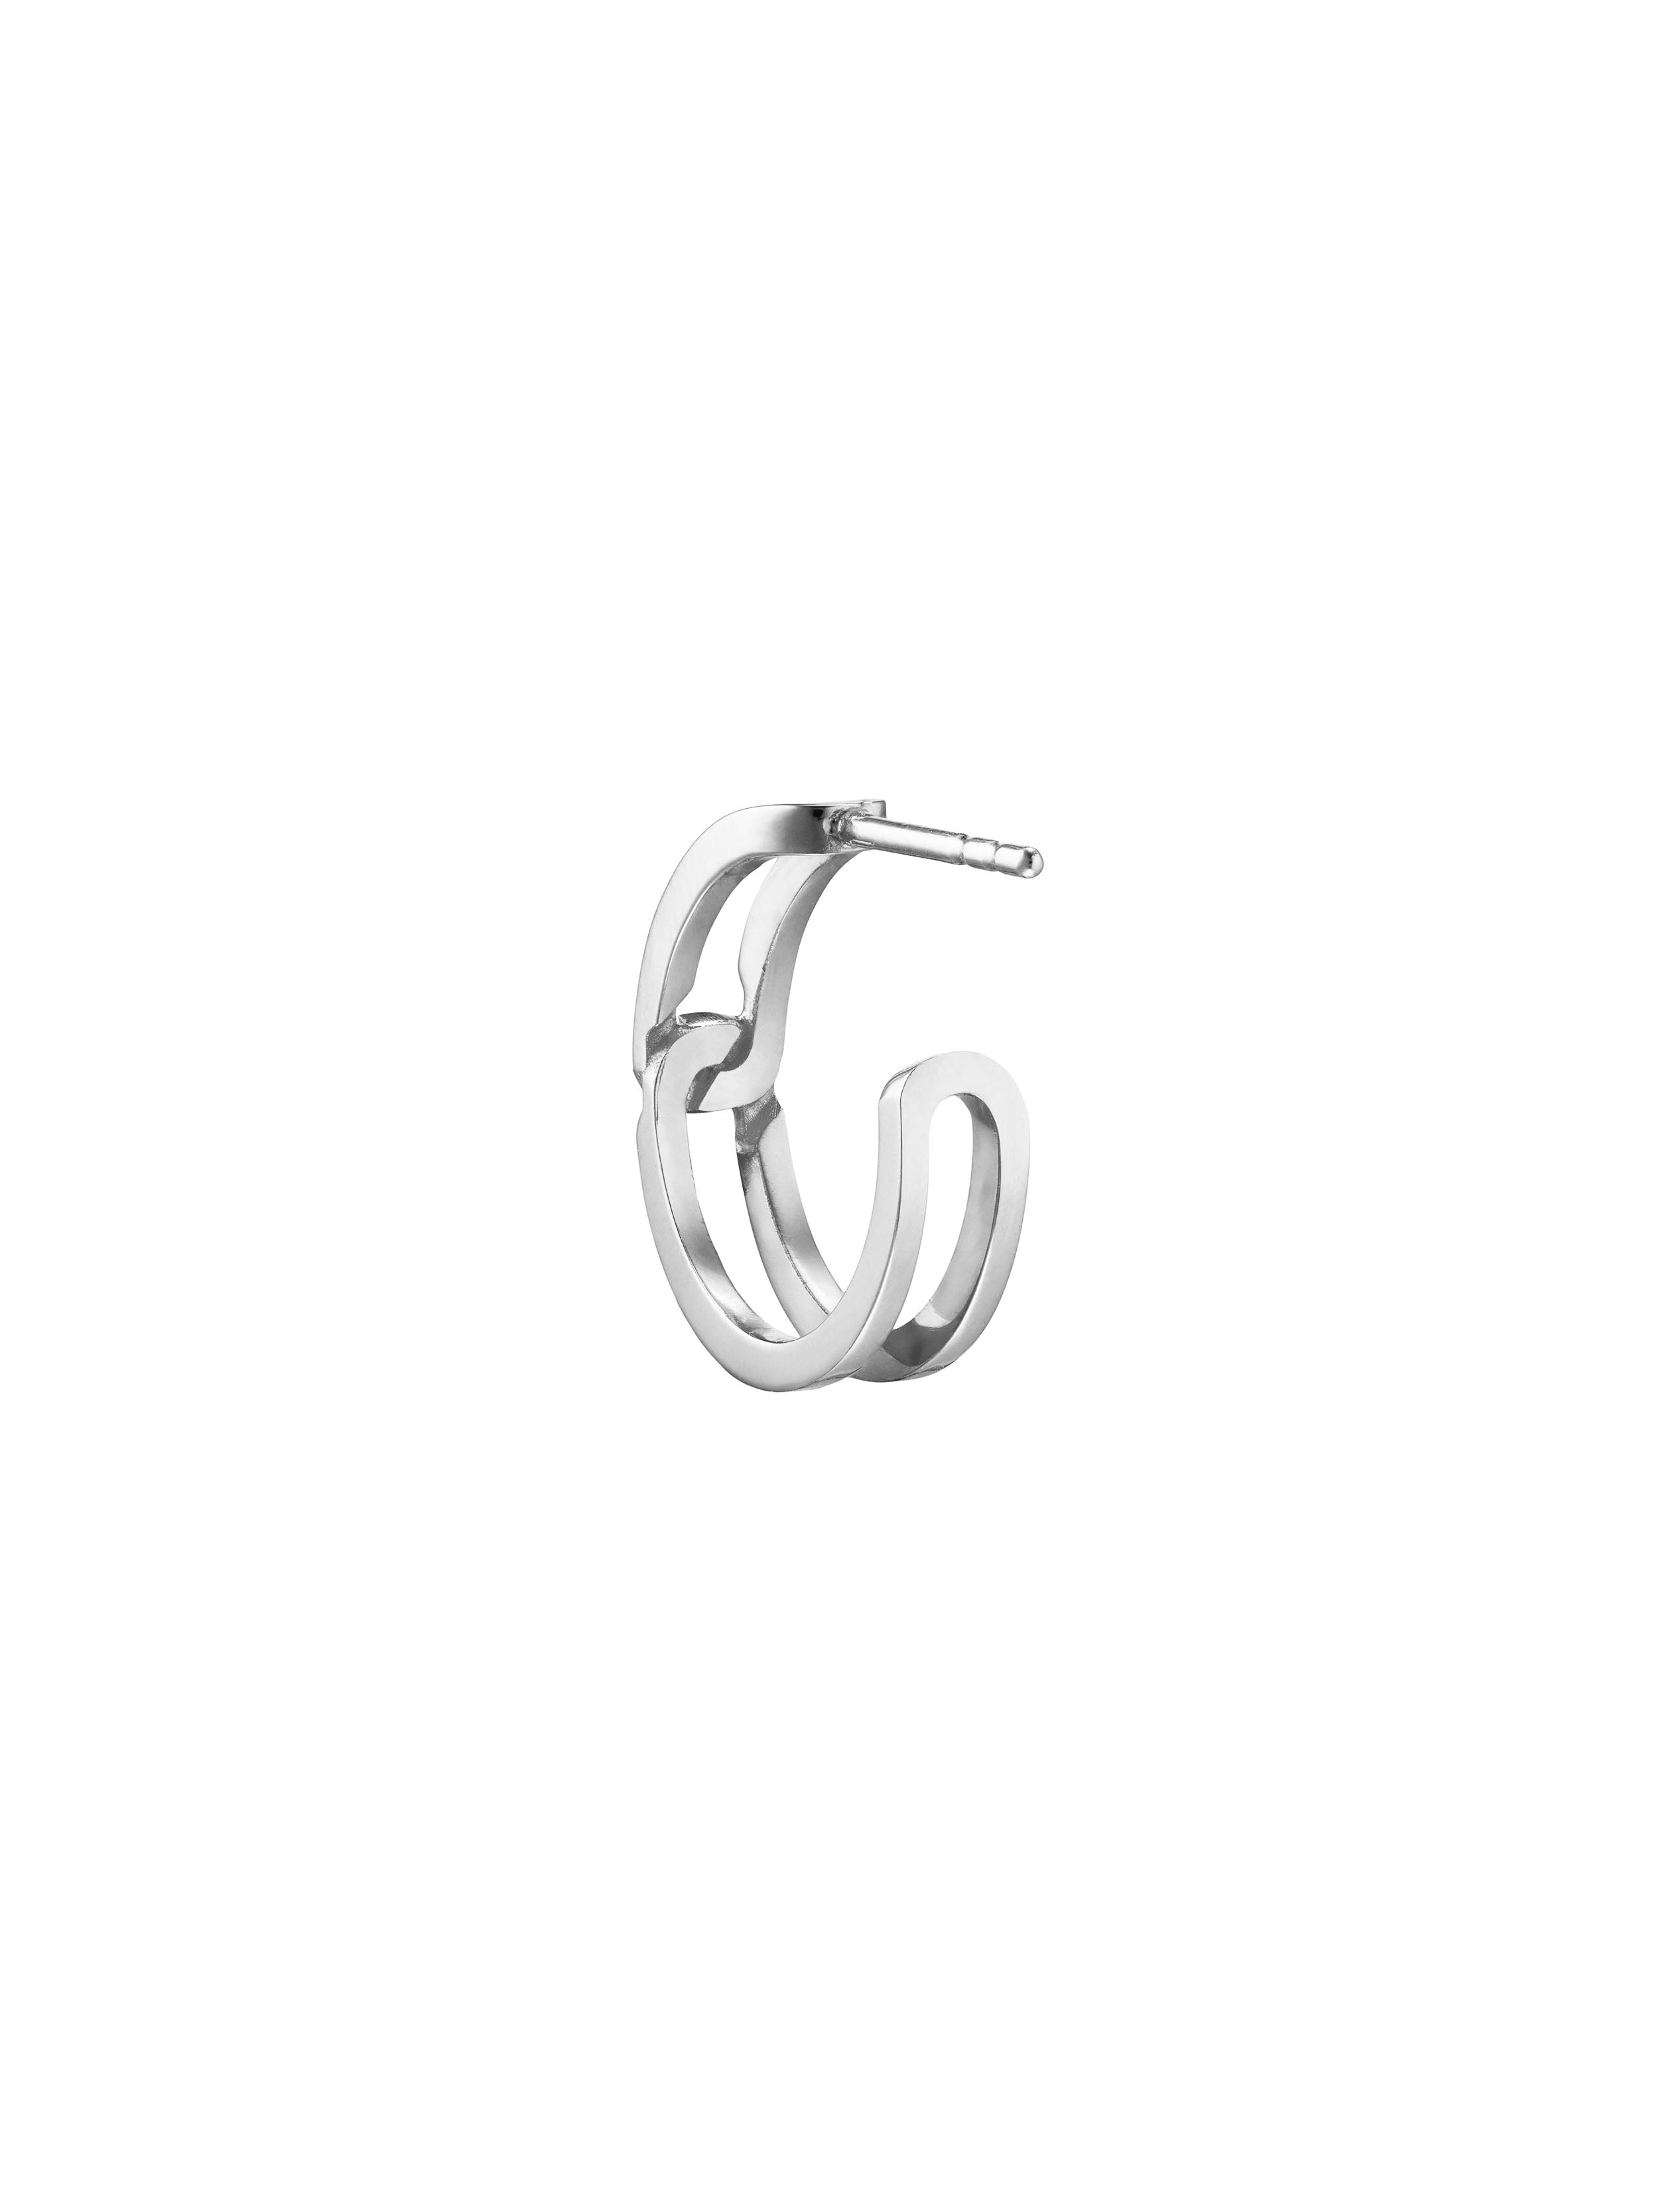 KINRADEN APS THE GASP SMALL Earring - sterling silver Earrings